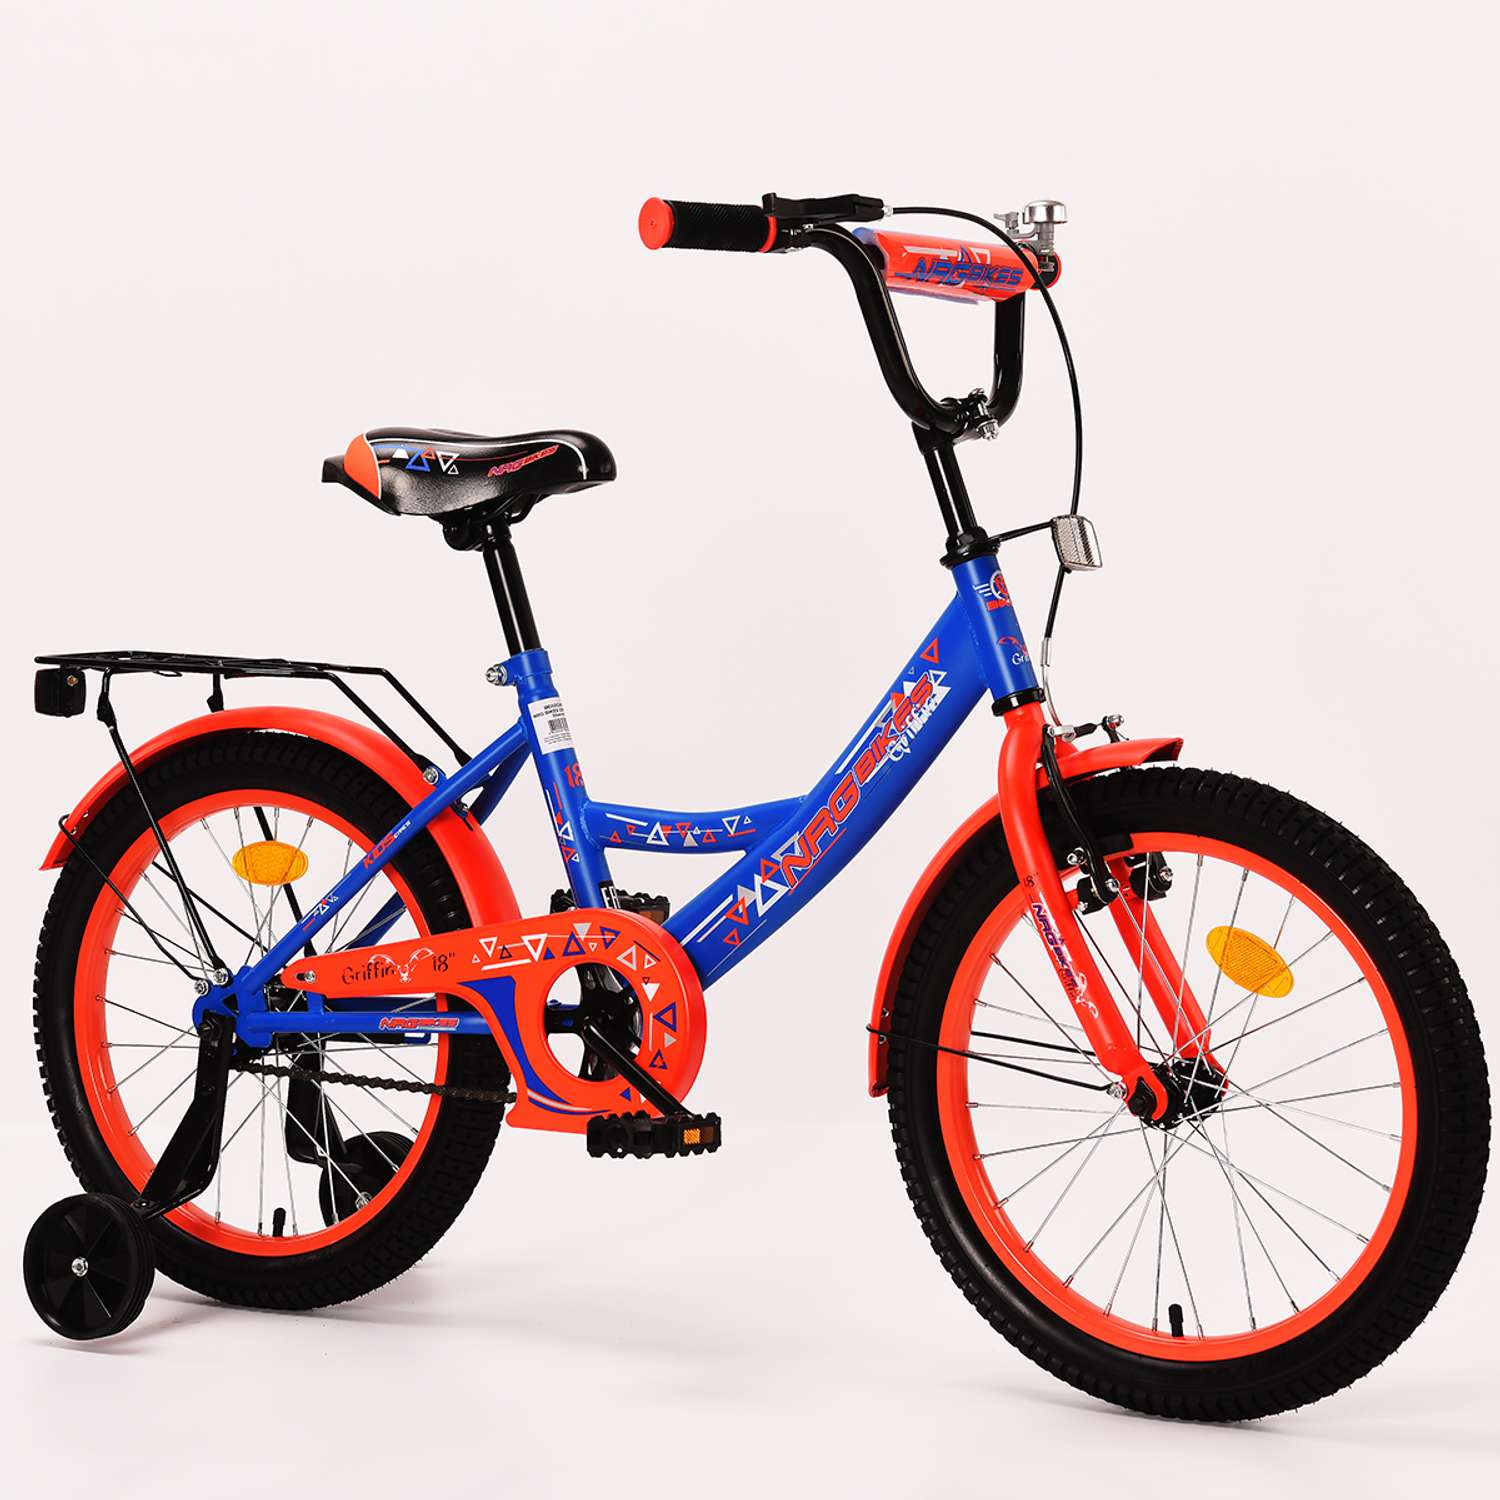 Велосипед NRG BIKES GRIFFIN 18 blue-red - фото 7